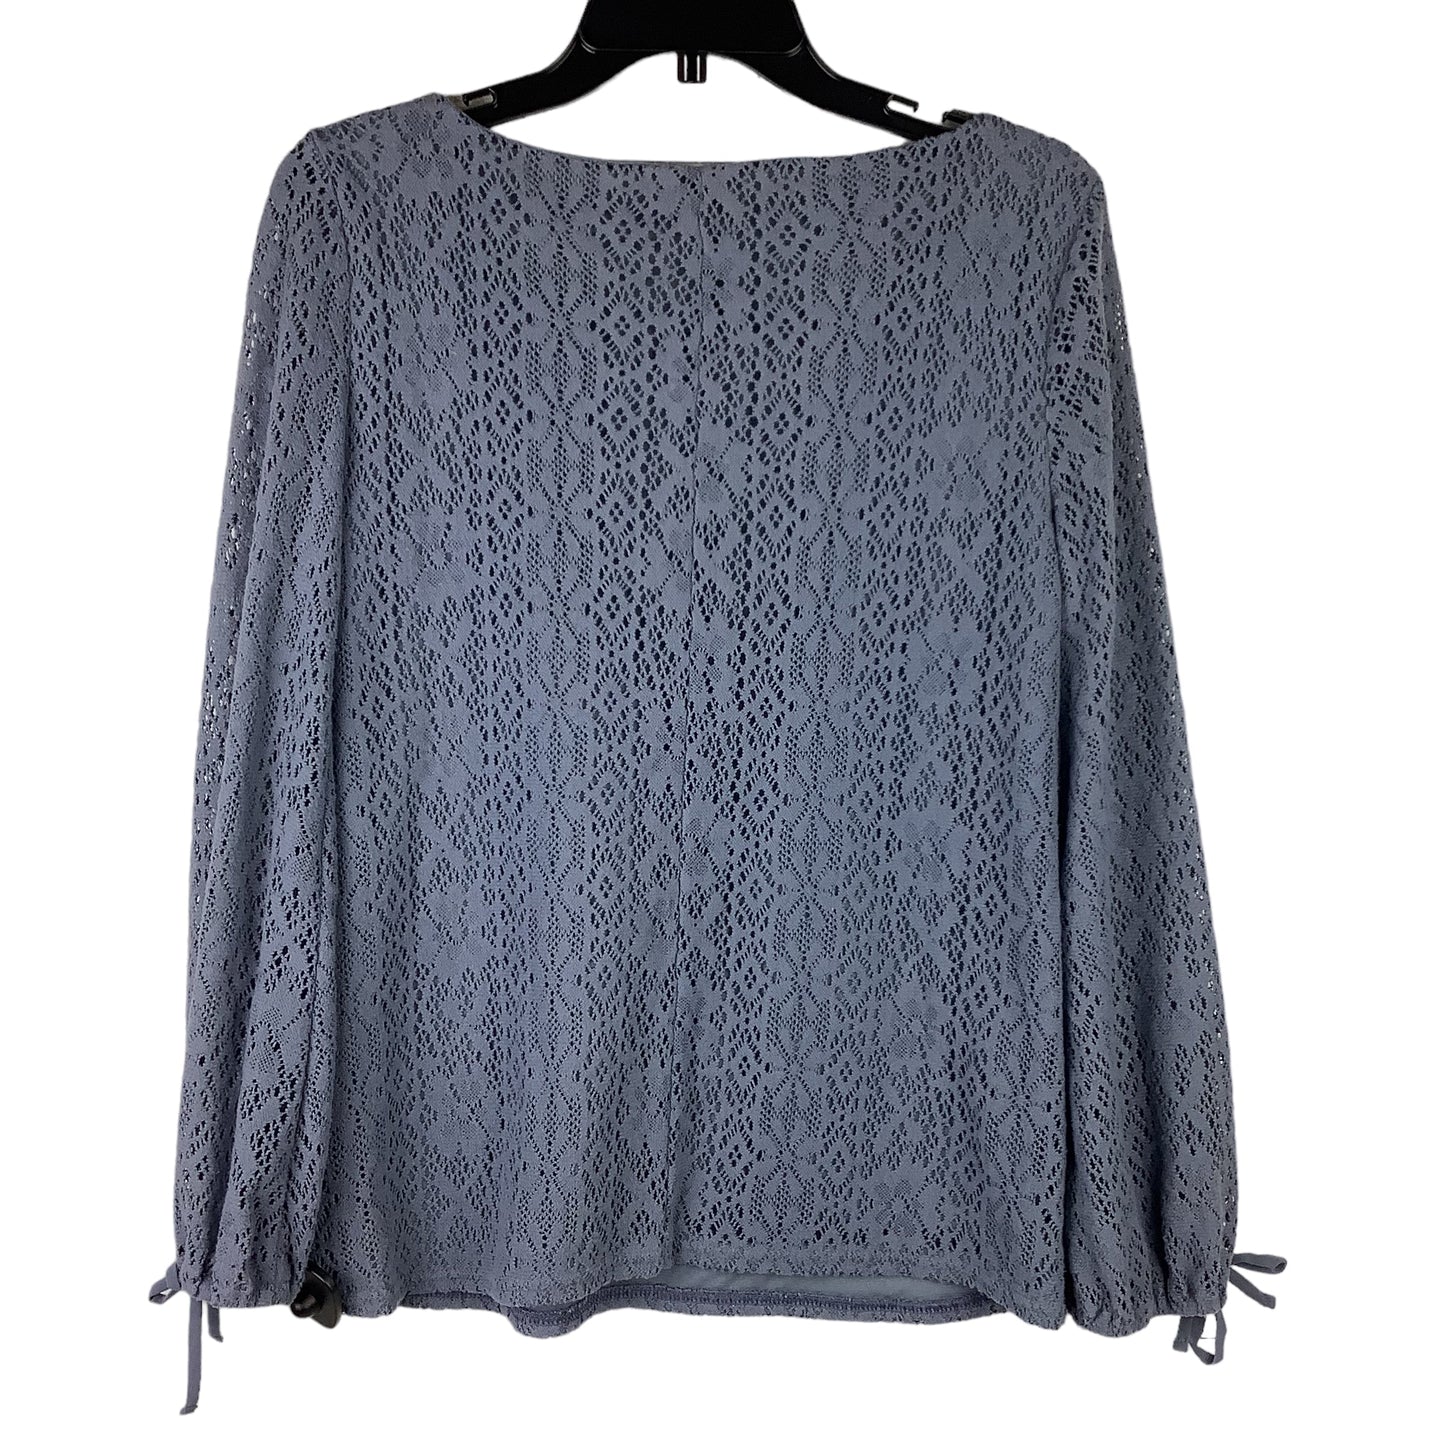 Top Long Sleeve By Lc Lauren Conrad  Size: Xs